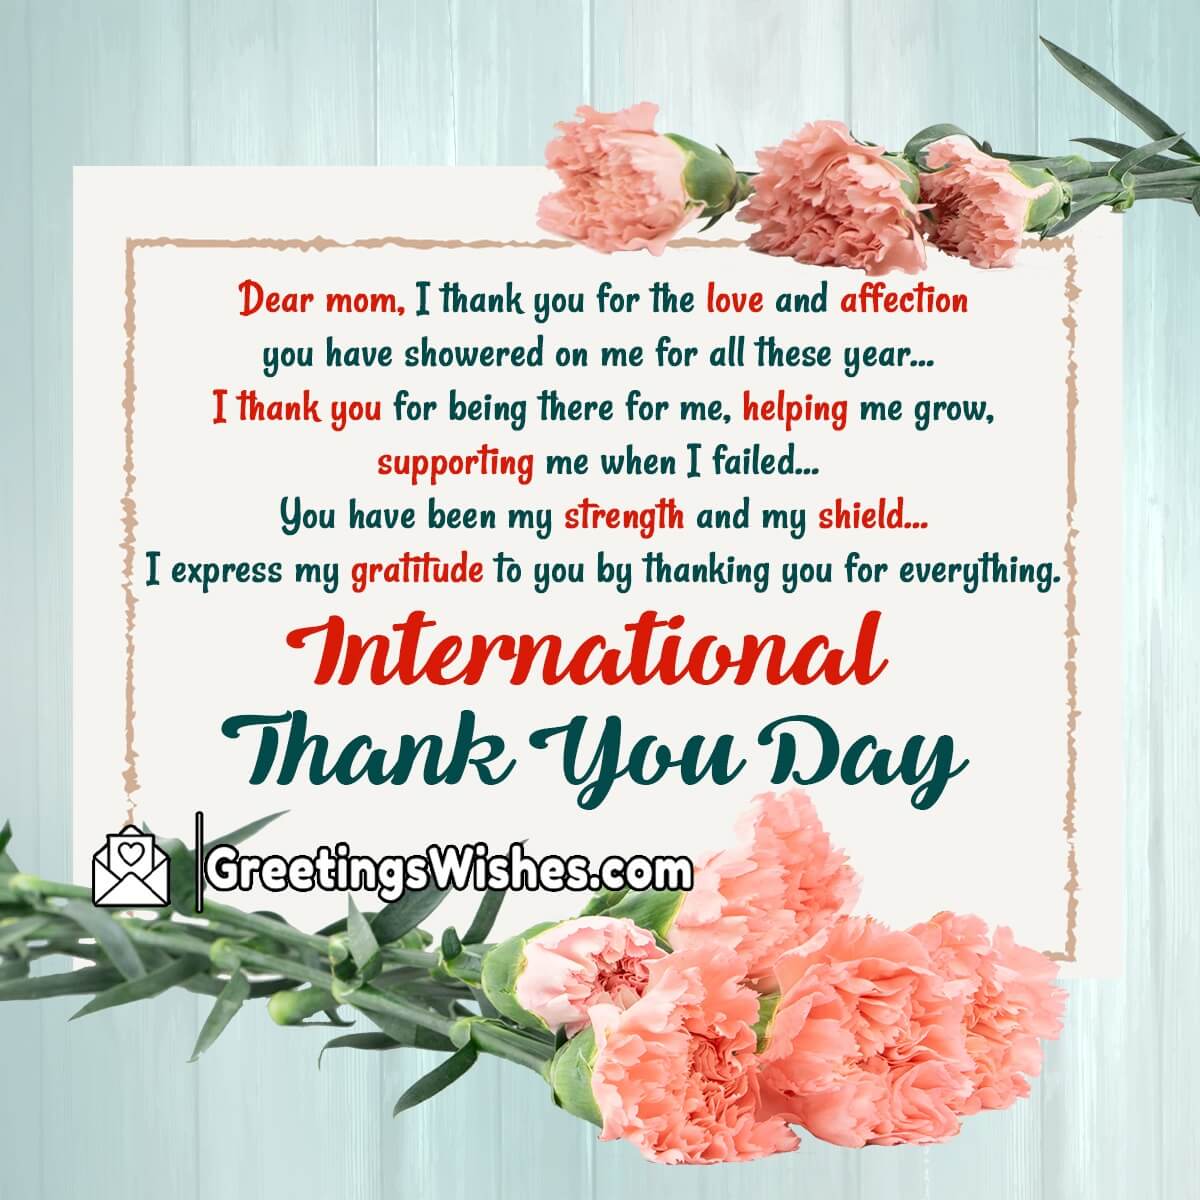 International Thank You Day Message For Mother